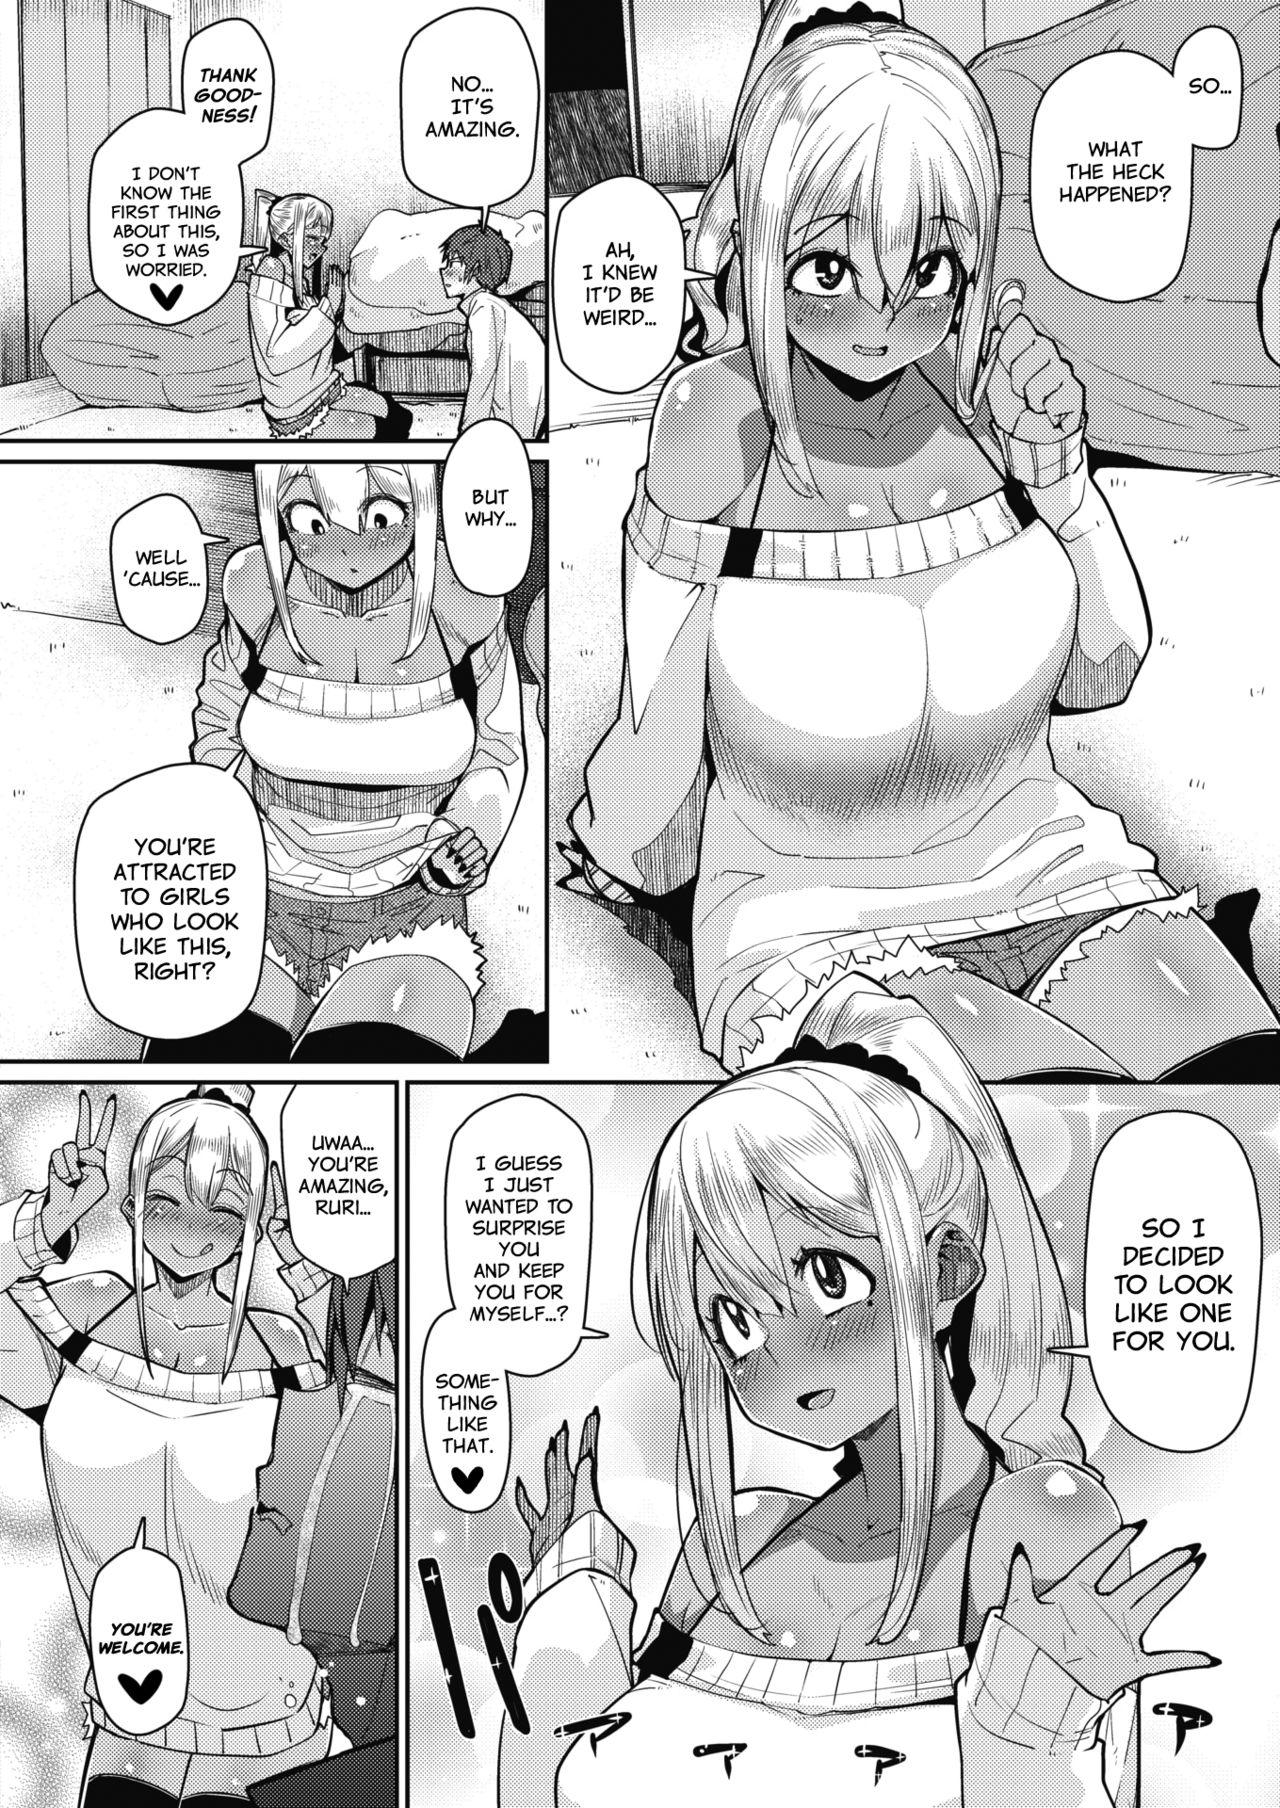 Hand Gekkan "The Bitch" o Mita Onna no Hannou ni Tsuite | About the Reaction of the Girl Who Saw "The Bitch Monthly" Morrita - Page 4